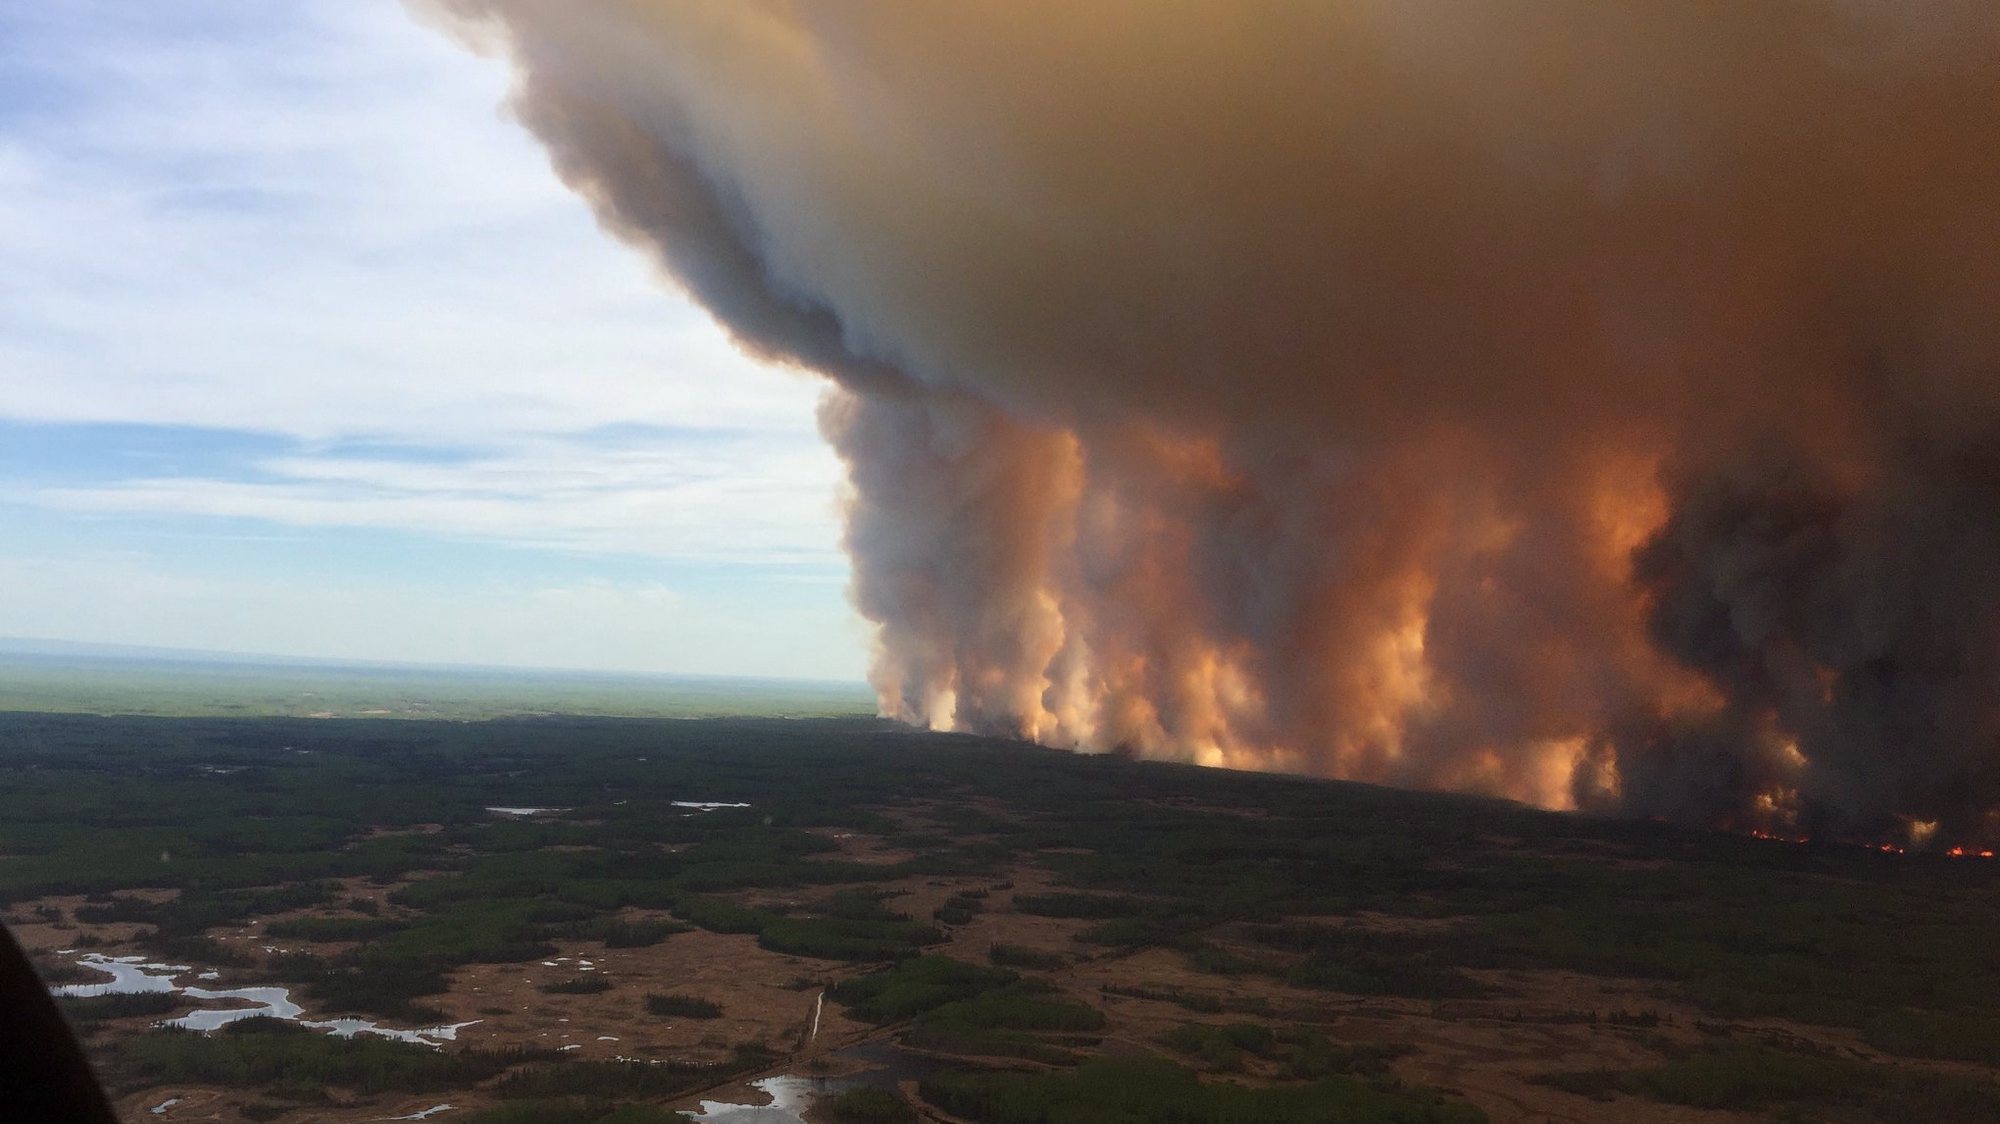 epa07593077 A handout photo made available by Alberta Wildfire shows smoke rising from a wildfire in Chuckegg Creek, Southwest of High Level, Alberta, Canada, 19 May 2019 (Issued 22 May 2019). According to reports on 20 May, more than 100 thousand acres burnt due to the Chuckegg Creek fire, seven miles southwest of High Level town in Alberta, Canada.  EPA/ALBERTA WILDFIRE HANDOUT  HANDOUT EDITORIAL USE ONLY/NO SALES